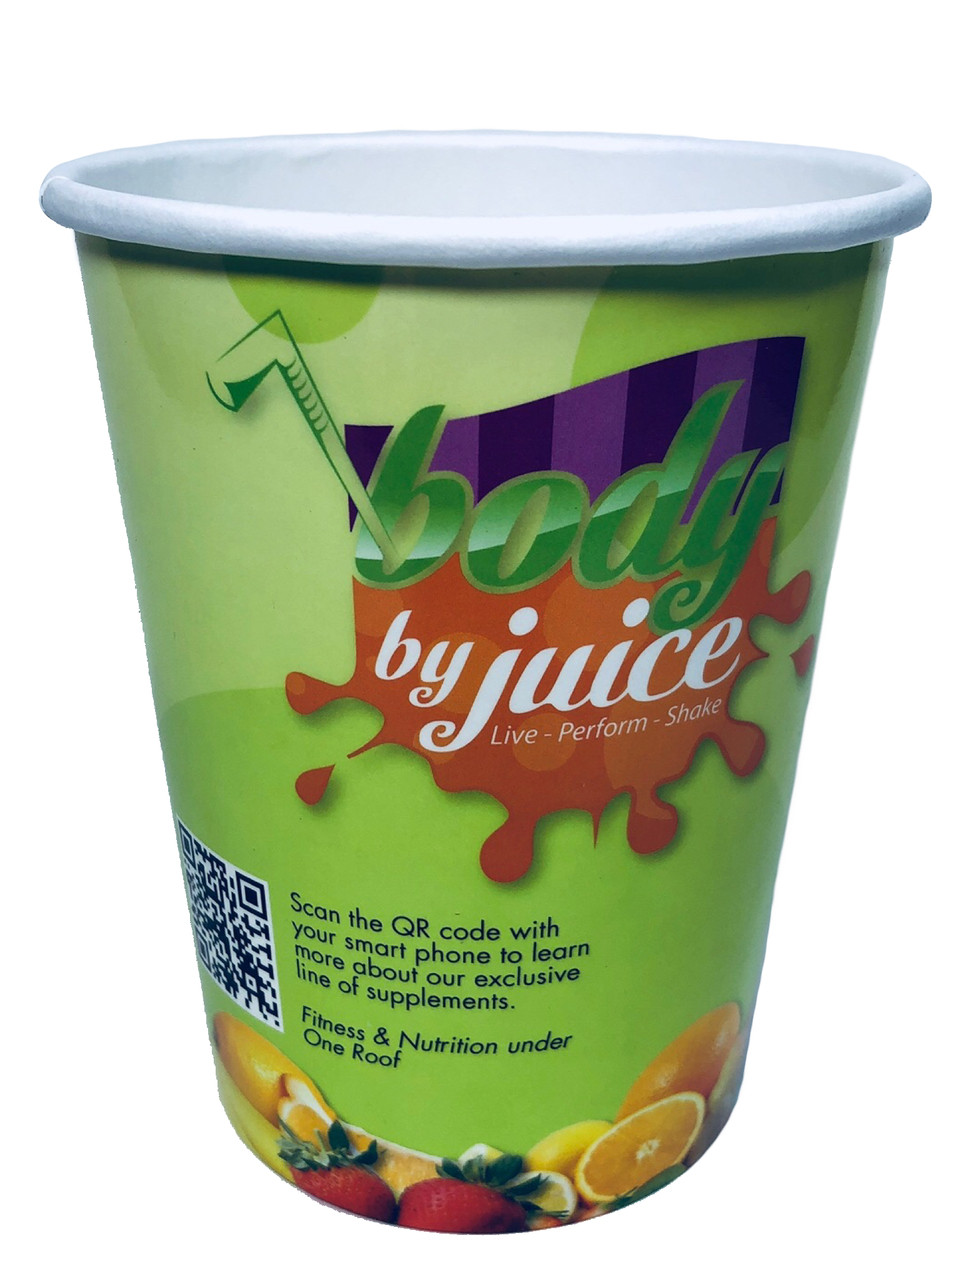 Custom Paper Cold Cups, Printed Cold Drink Paper Cup